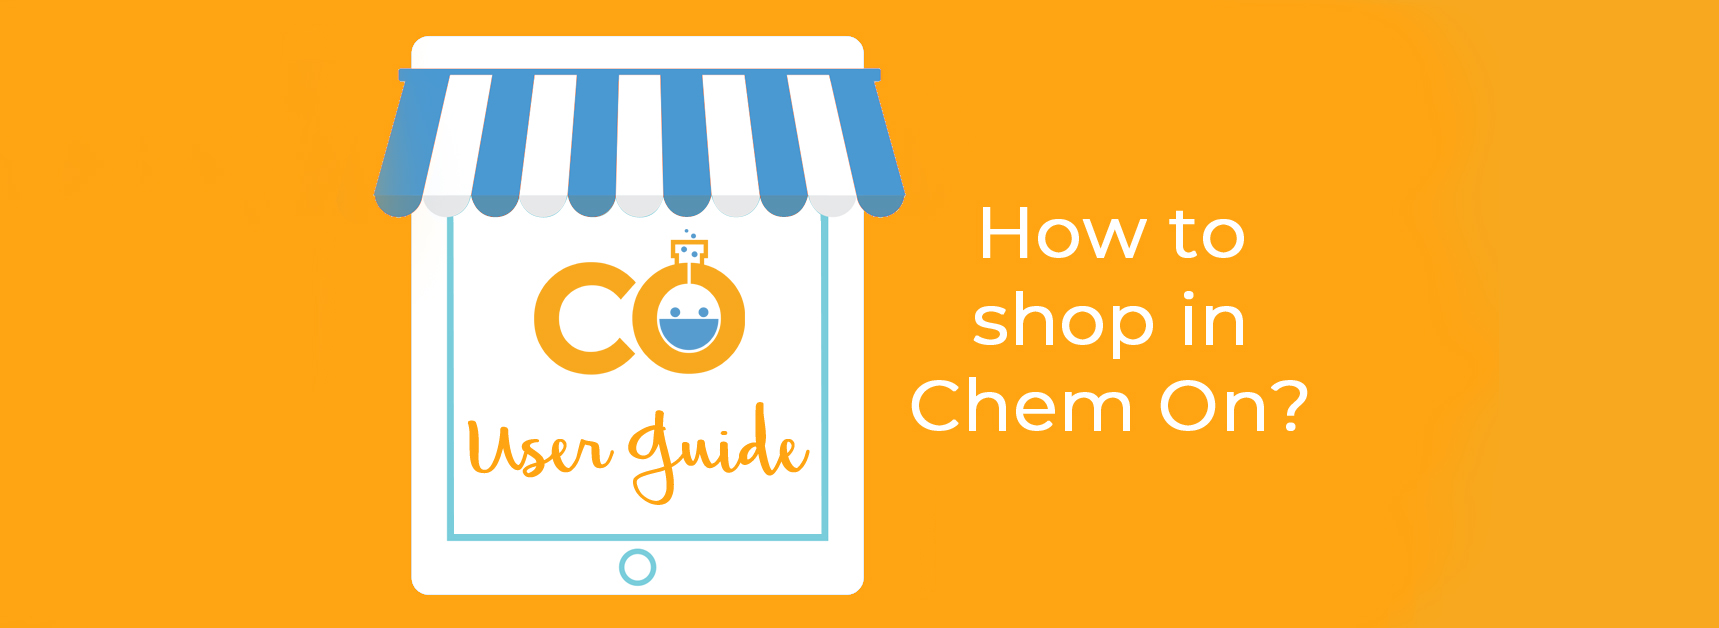 How to shop in Chem On?